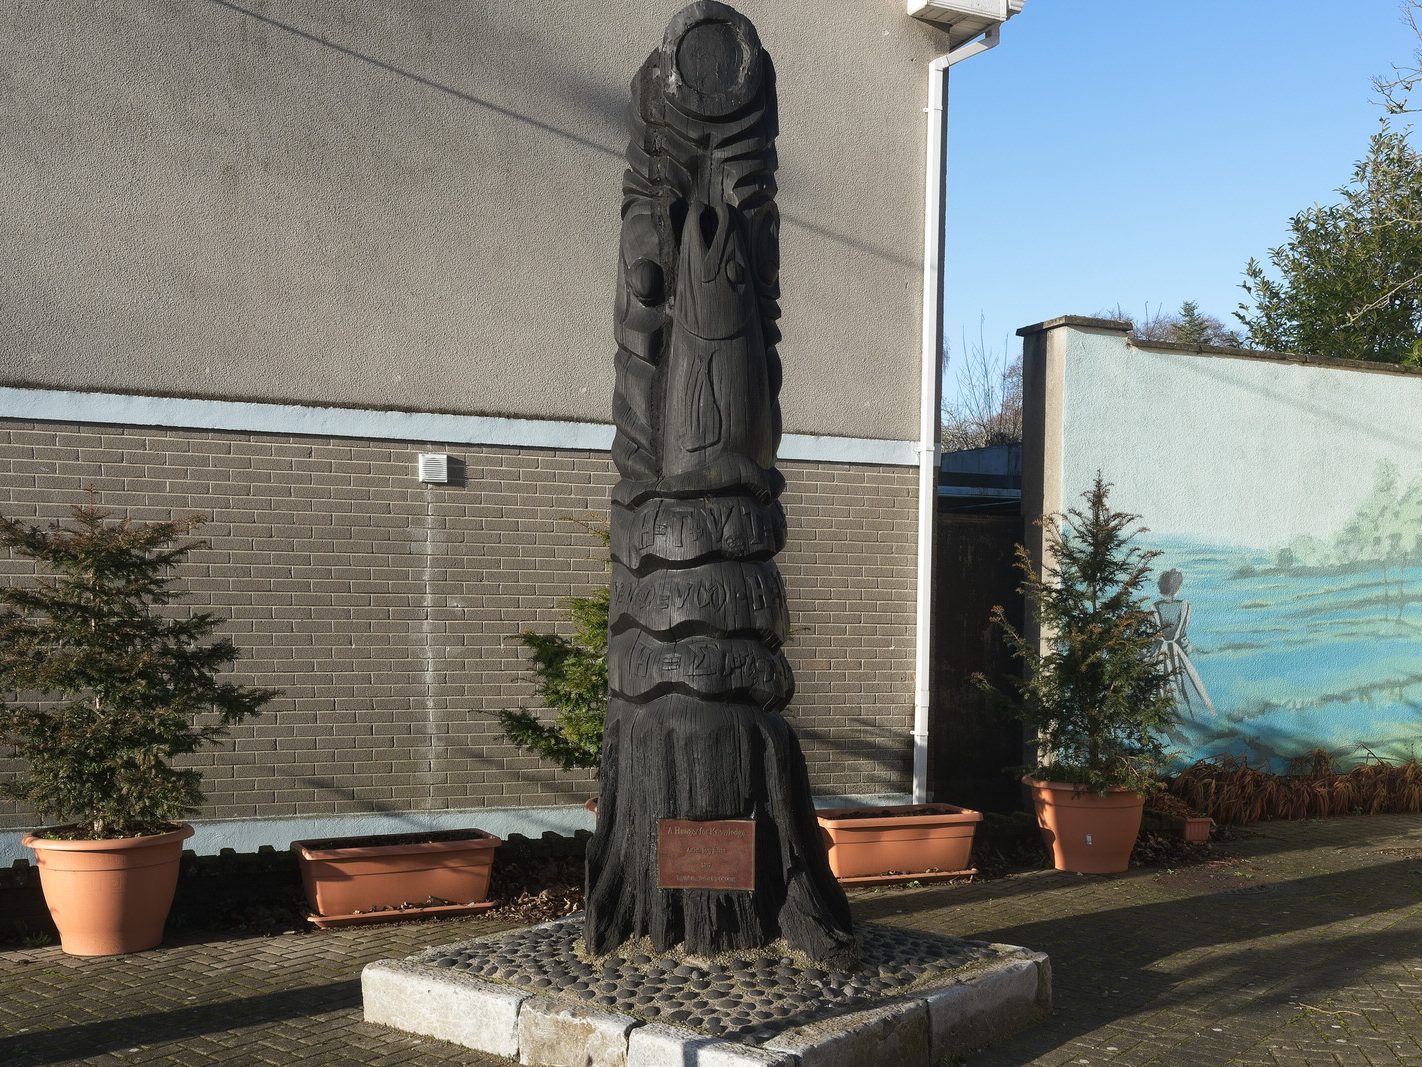 A HUNGER FOR KNOWLEDGE BY JOEY BURNS PLUS A MURAL[A BOG OAK SCULPTURE REPRESENTING THE SALMON OF KNOWLEDGE]-225059-1